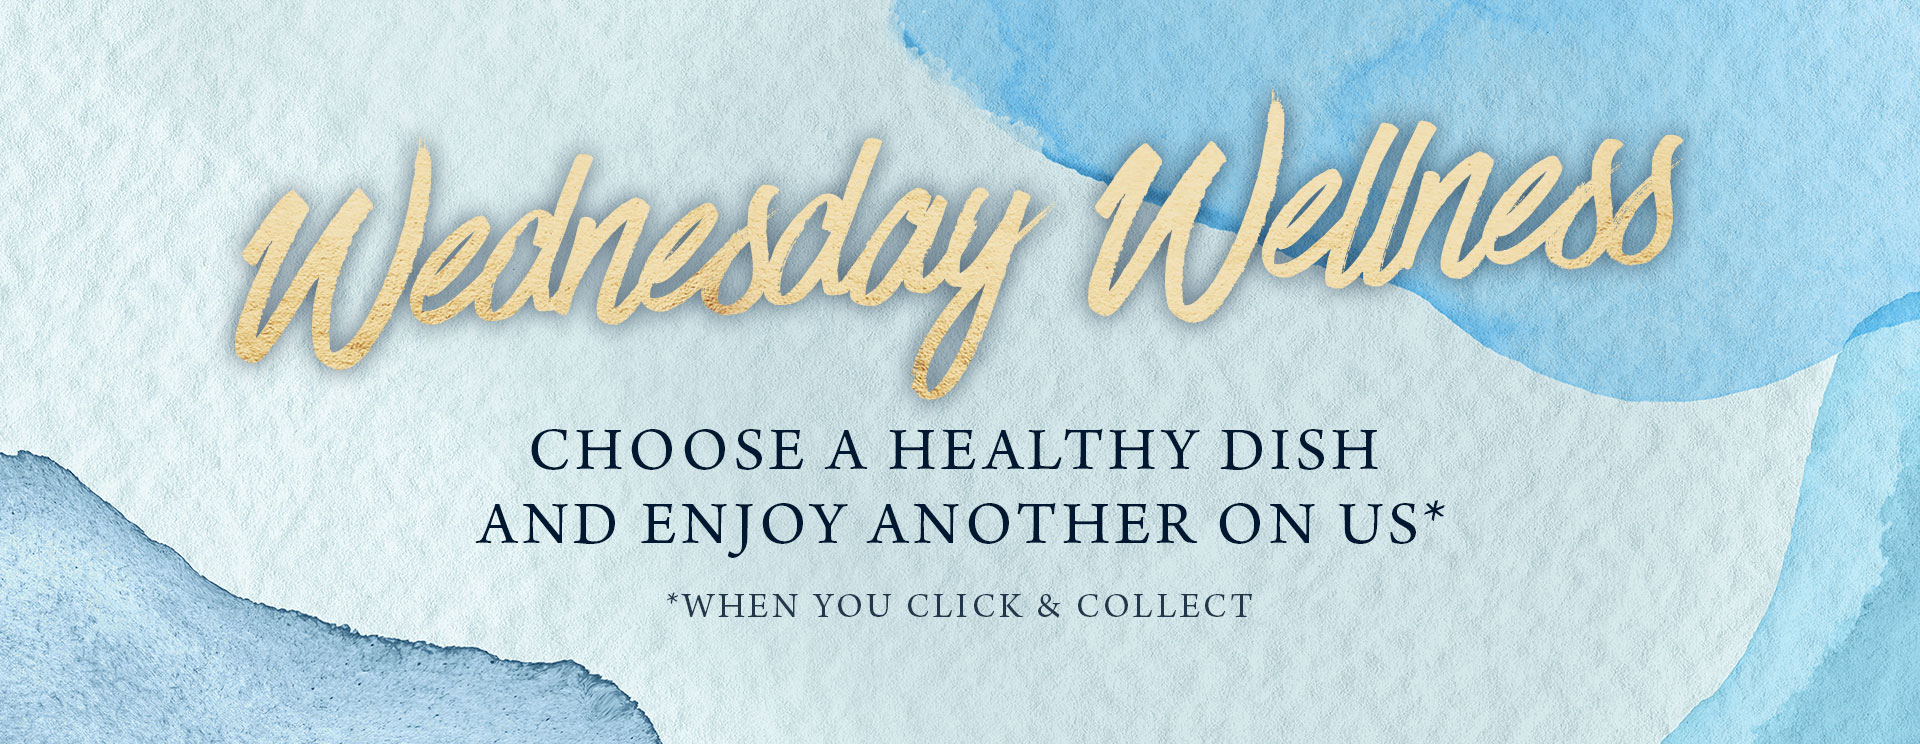 Wednesday Wellness at The Fox & Hounds